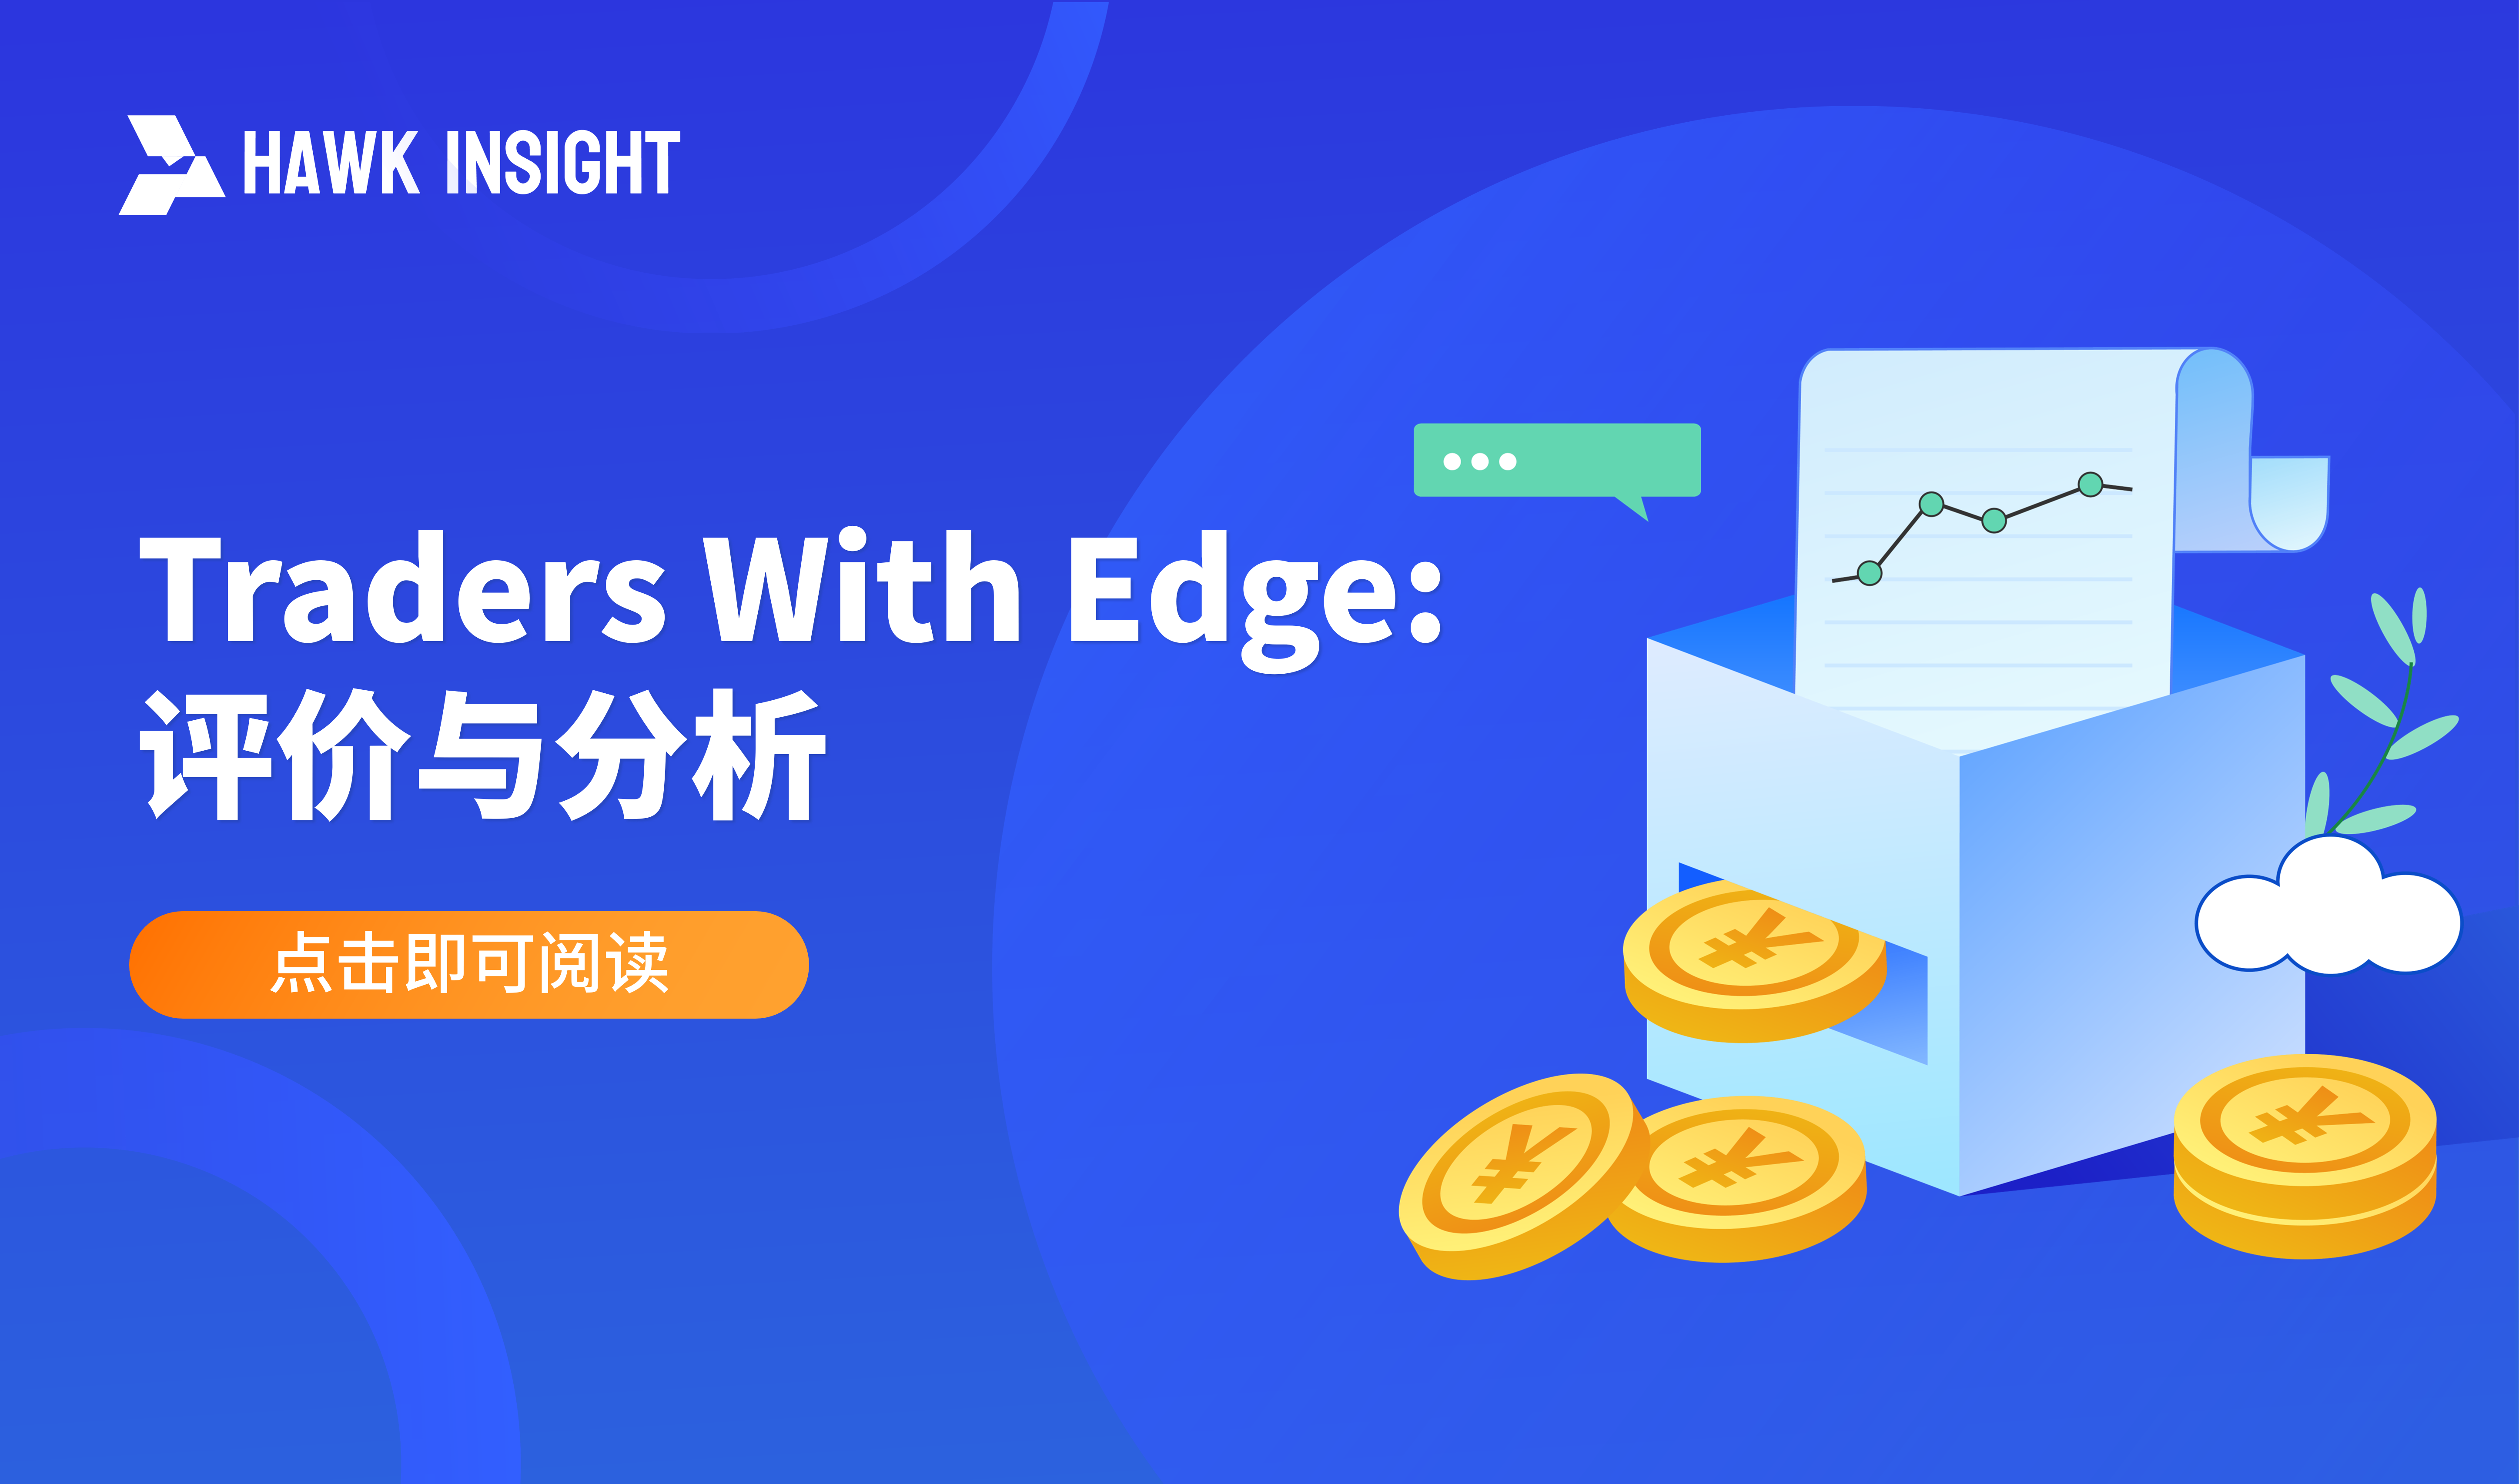 Traders With Edge: 评价与分析